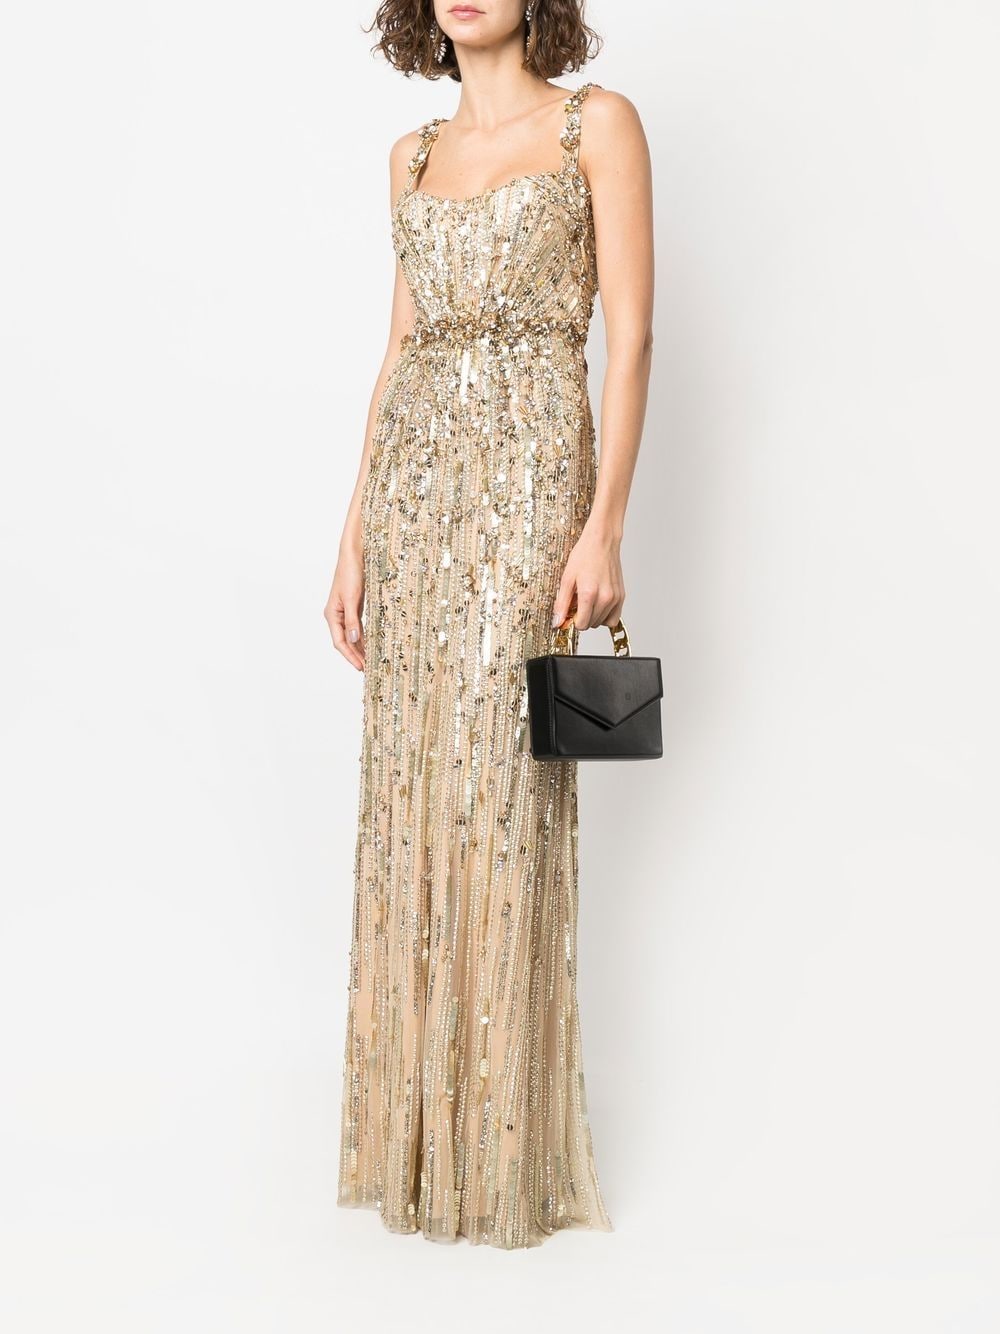 Jenny Packham sequin-embellished Gown - Farfetch